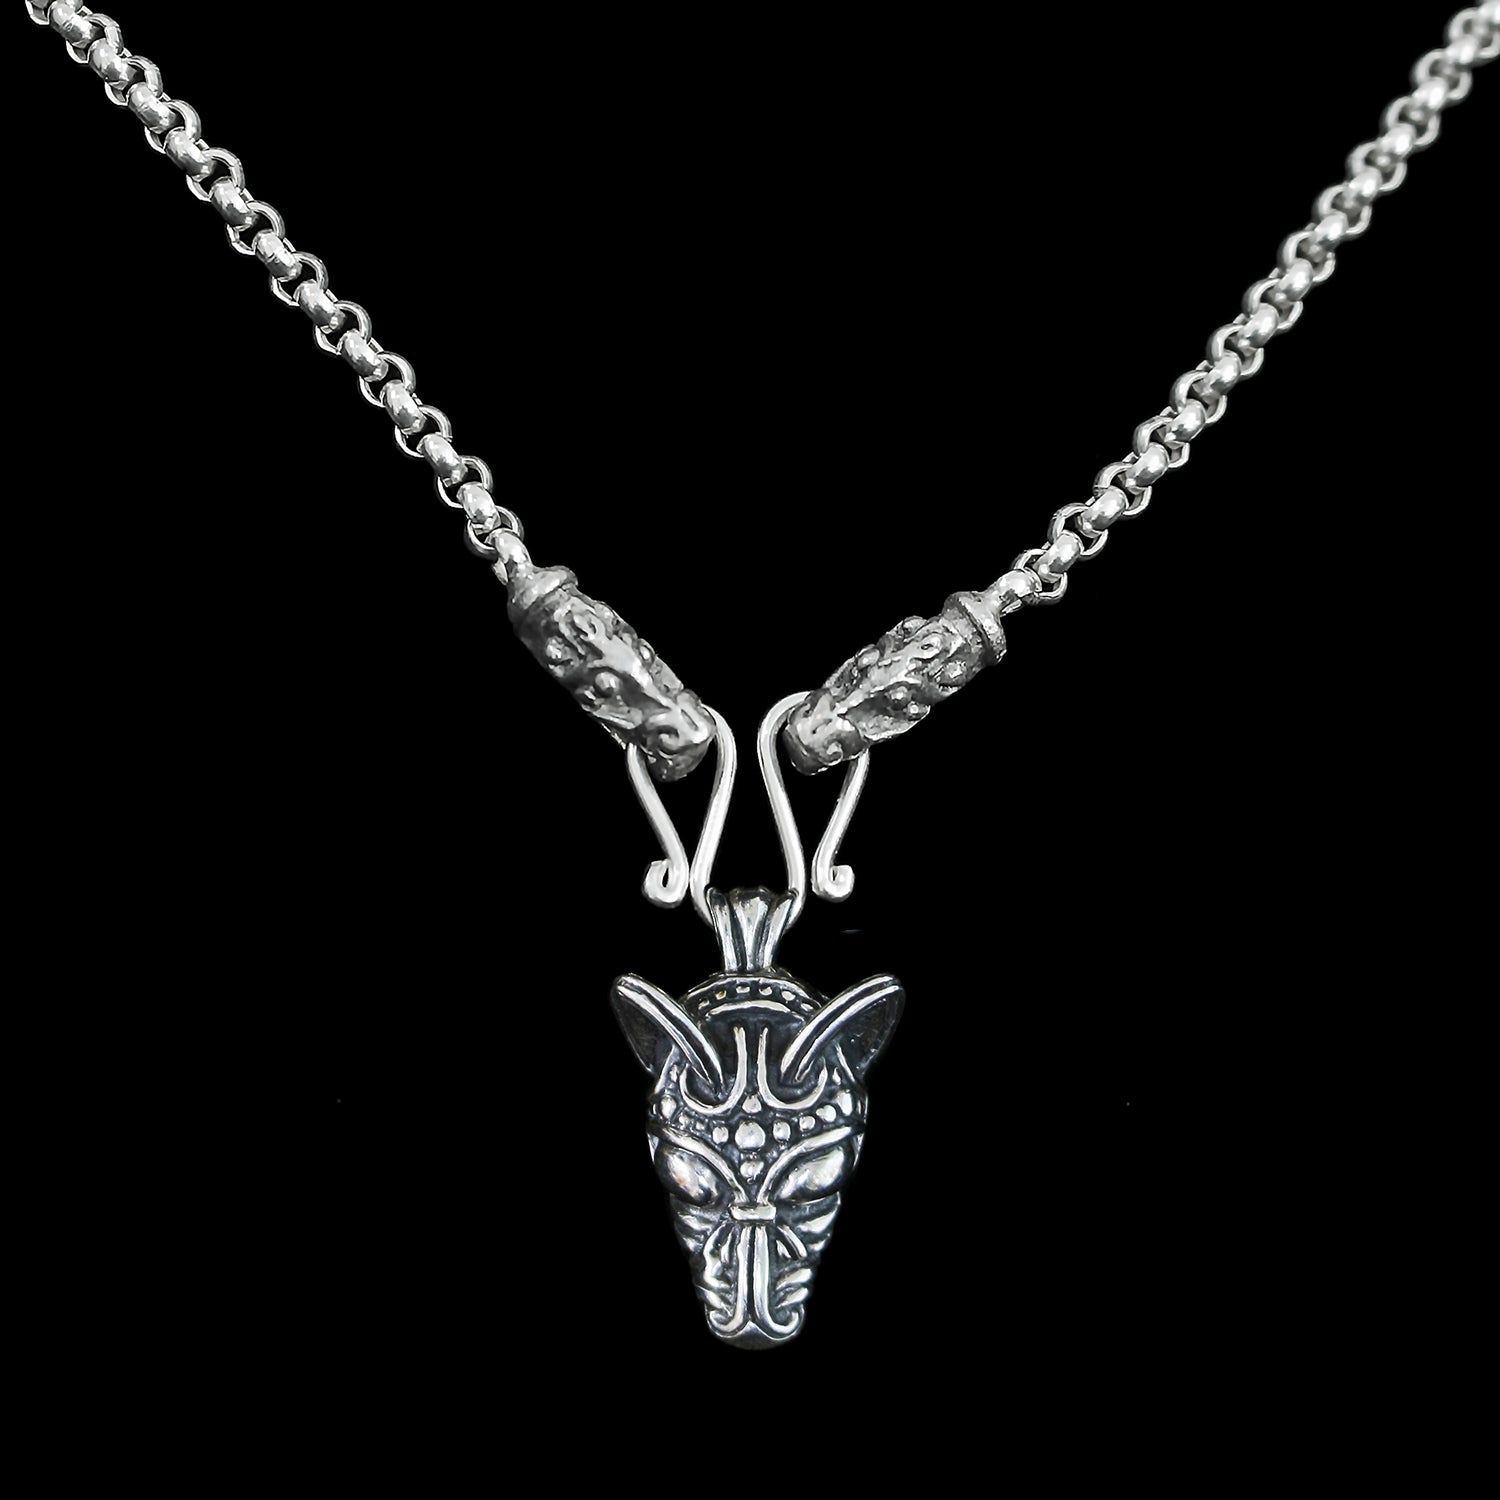 Slim Silver Anchor Chain Pendant Necklace with Gotland Dragon Heads with Wolf Pendant